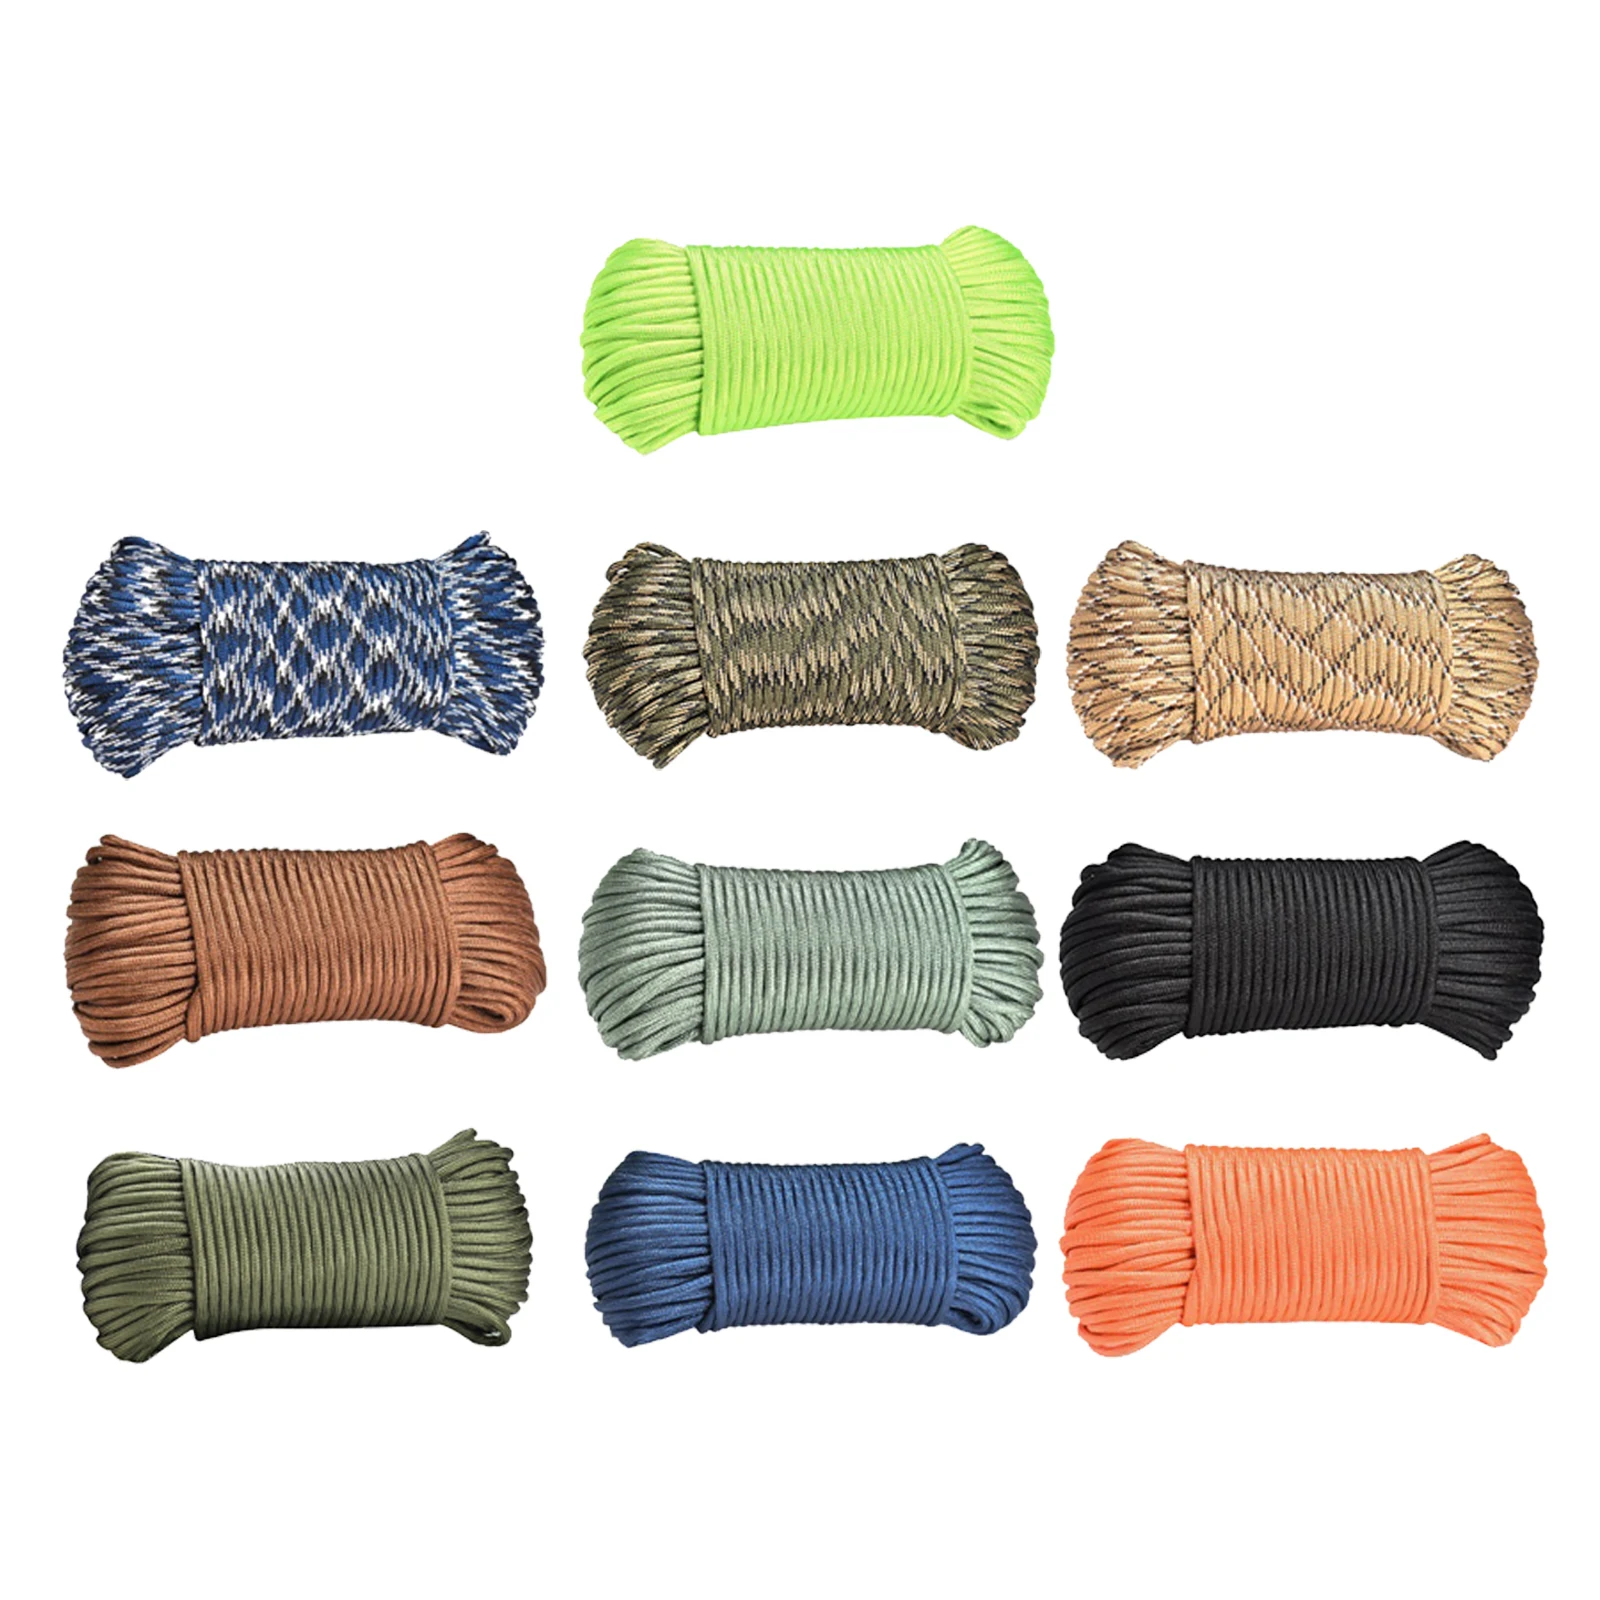 

Type III 650 Paracord – 10 Strand Core – 100% Nylon, Parachute Cord, Commercial Paracord, Survival Cord, Lengths 100 ft